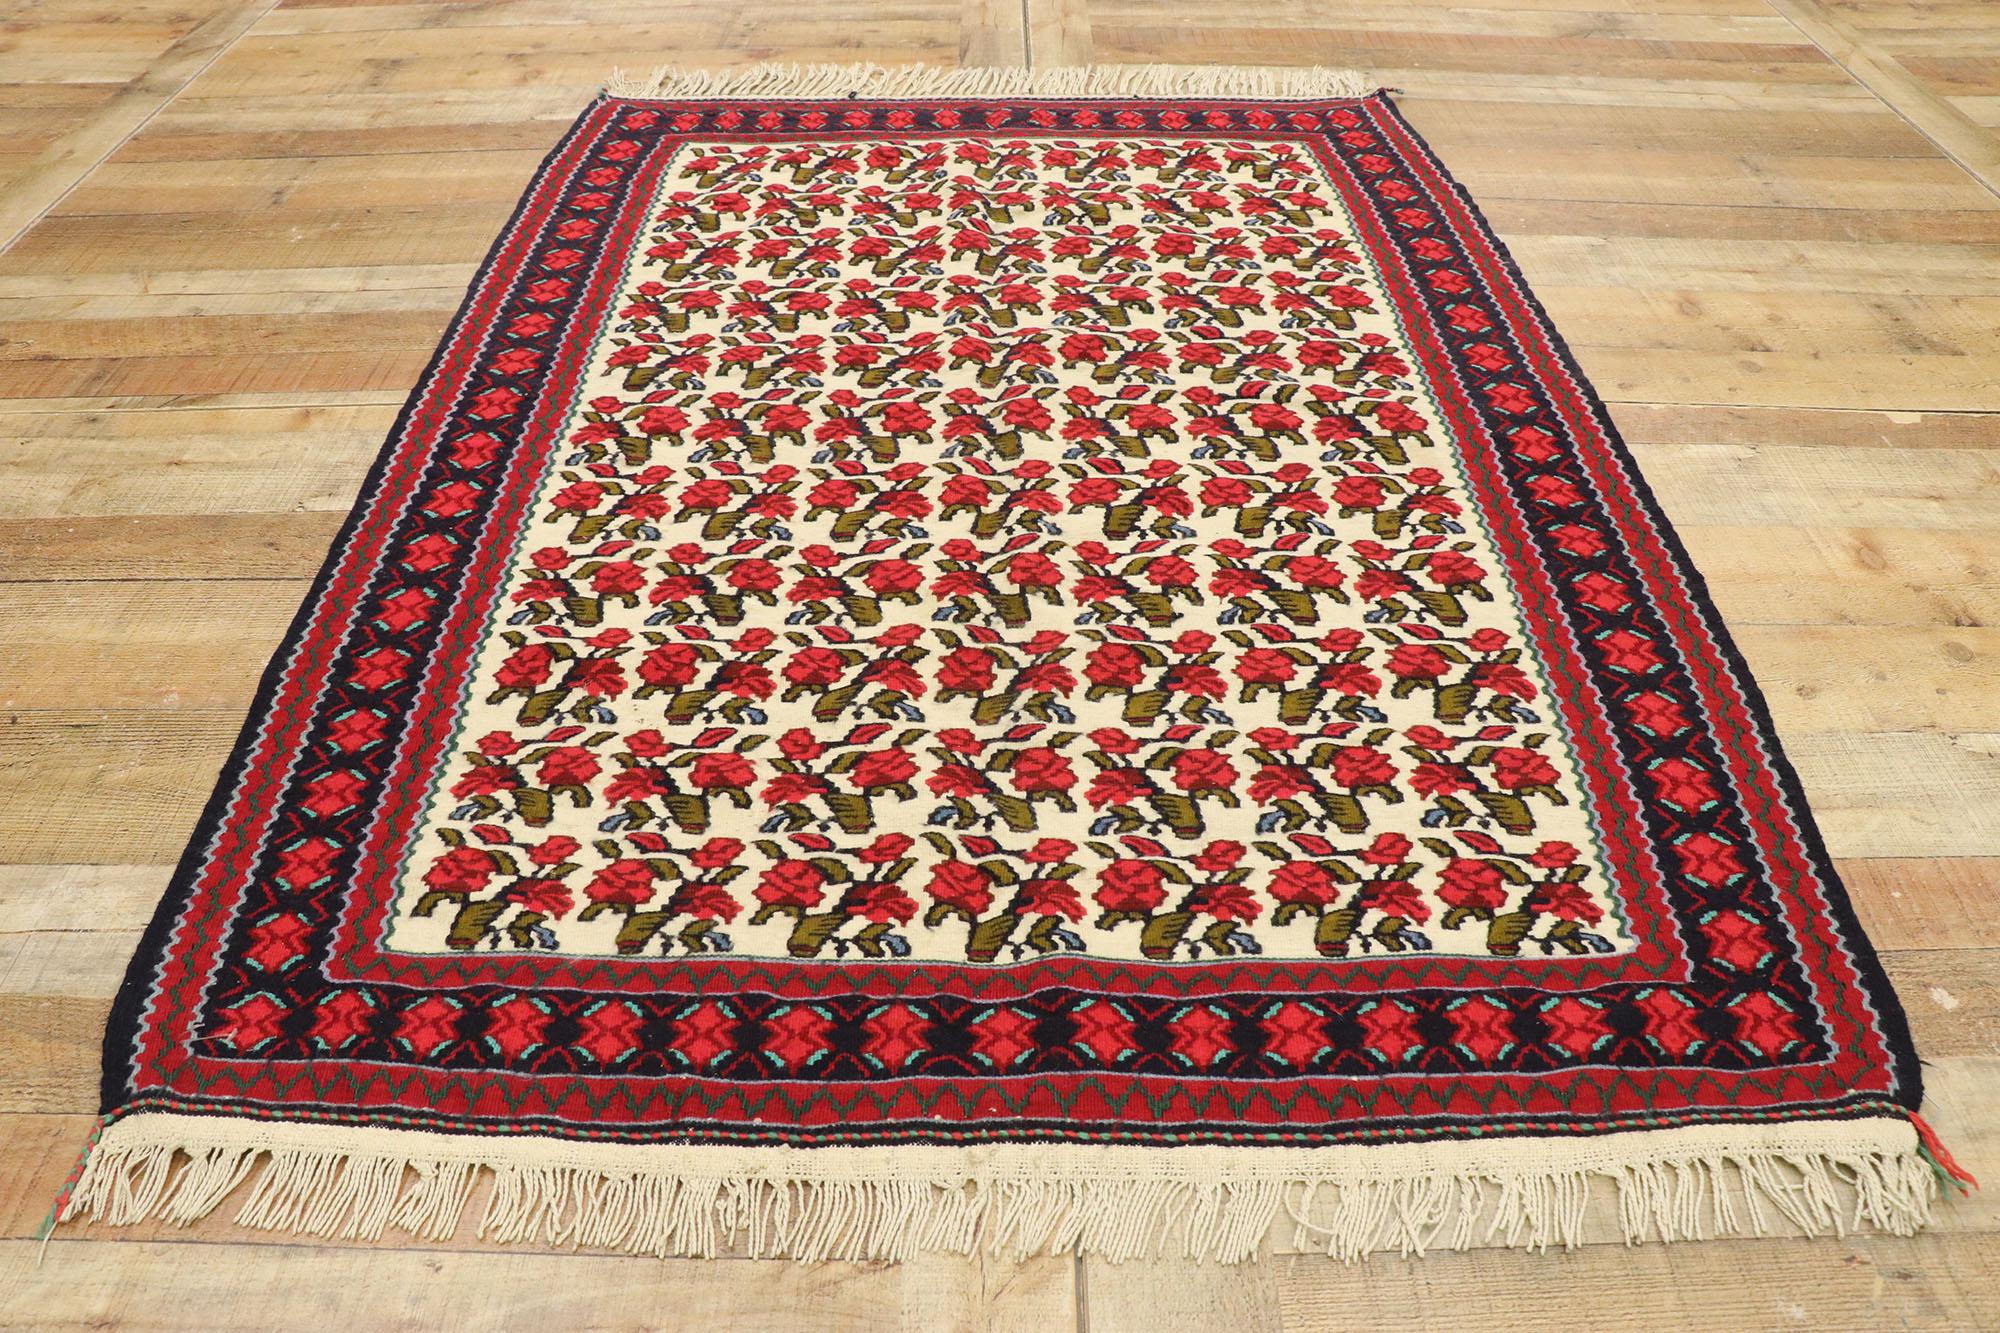 Wool Vintage Persian Floral Kilim Rug with English Tudor Manor House Style